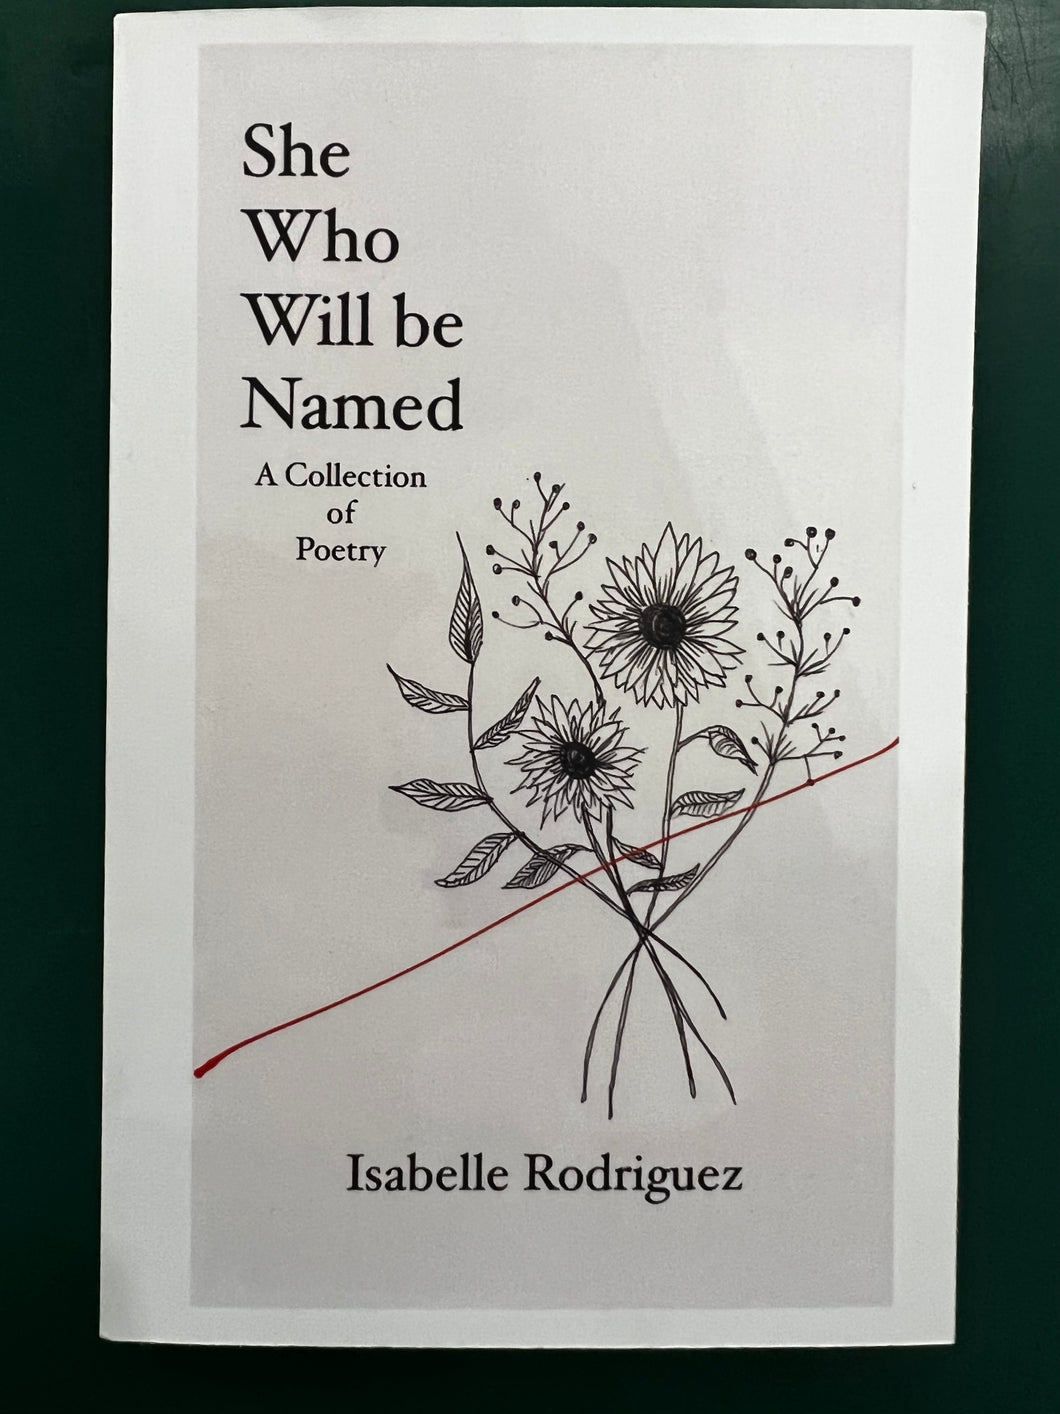 Poetry Book - She Who Will Be Named by Isabelle Rodriguez